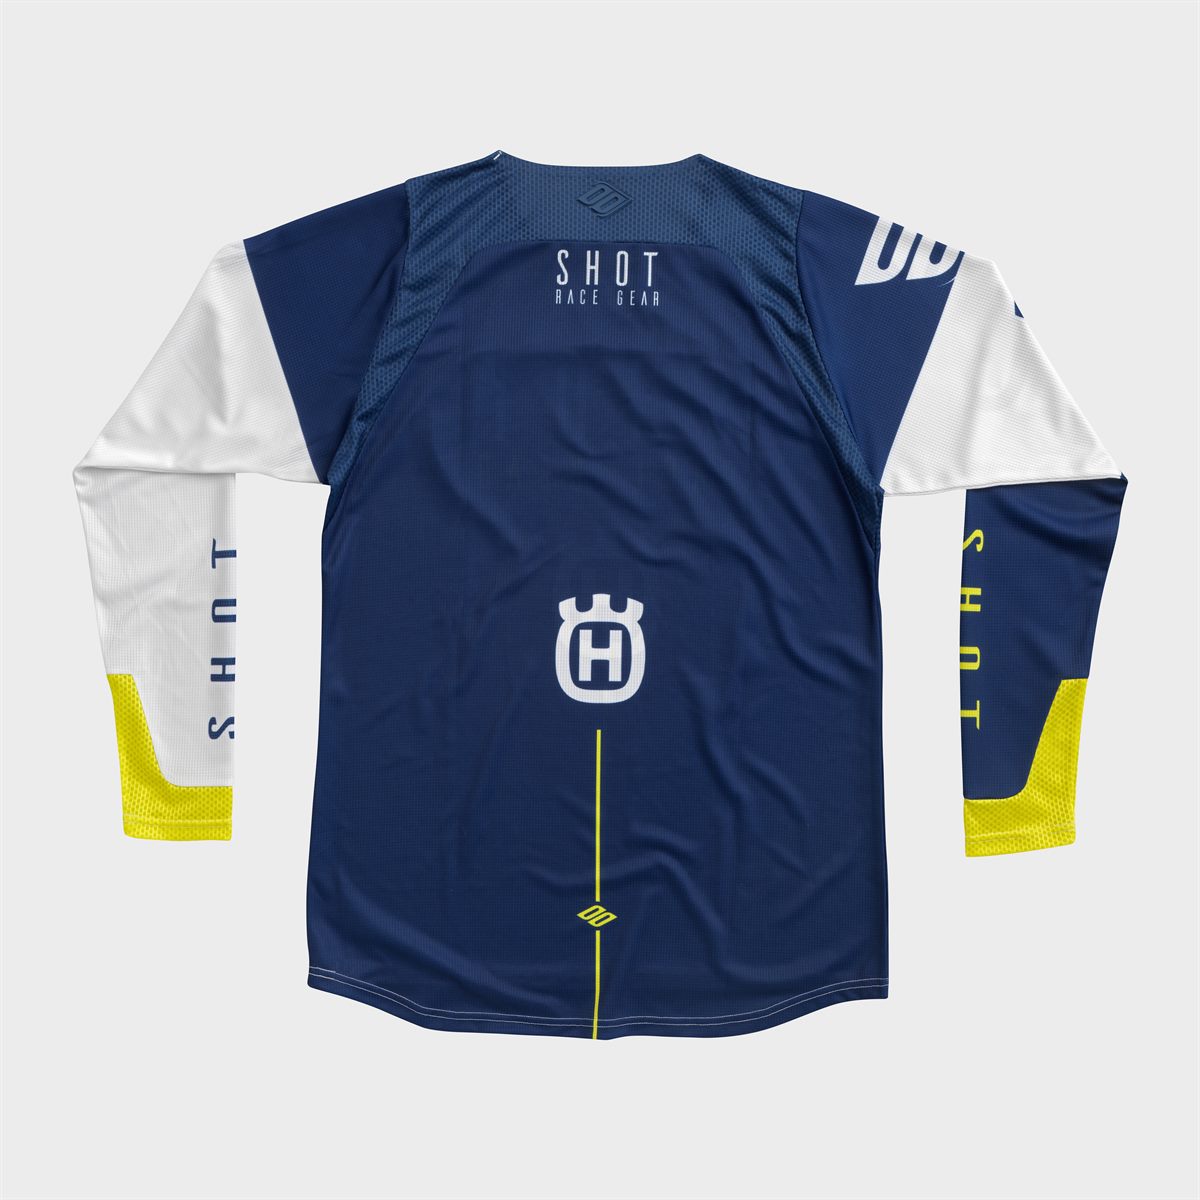 HUSQVARNA MOTORCYCLES REPLICA FLASH COLLECTION 2019 BY SHOT